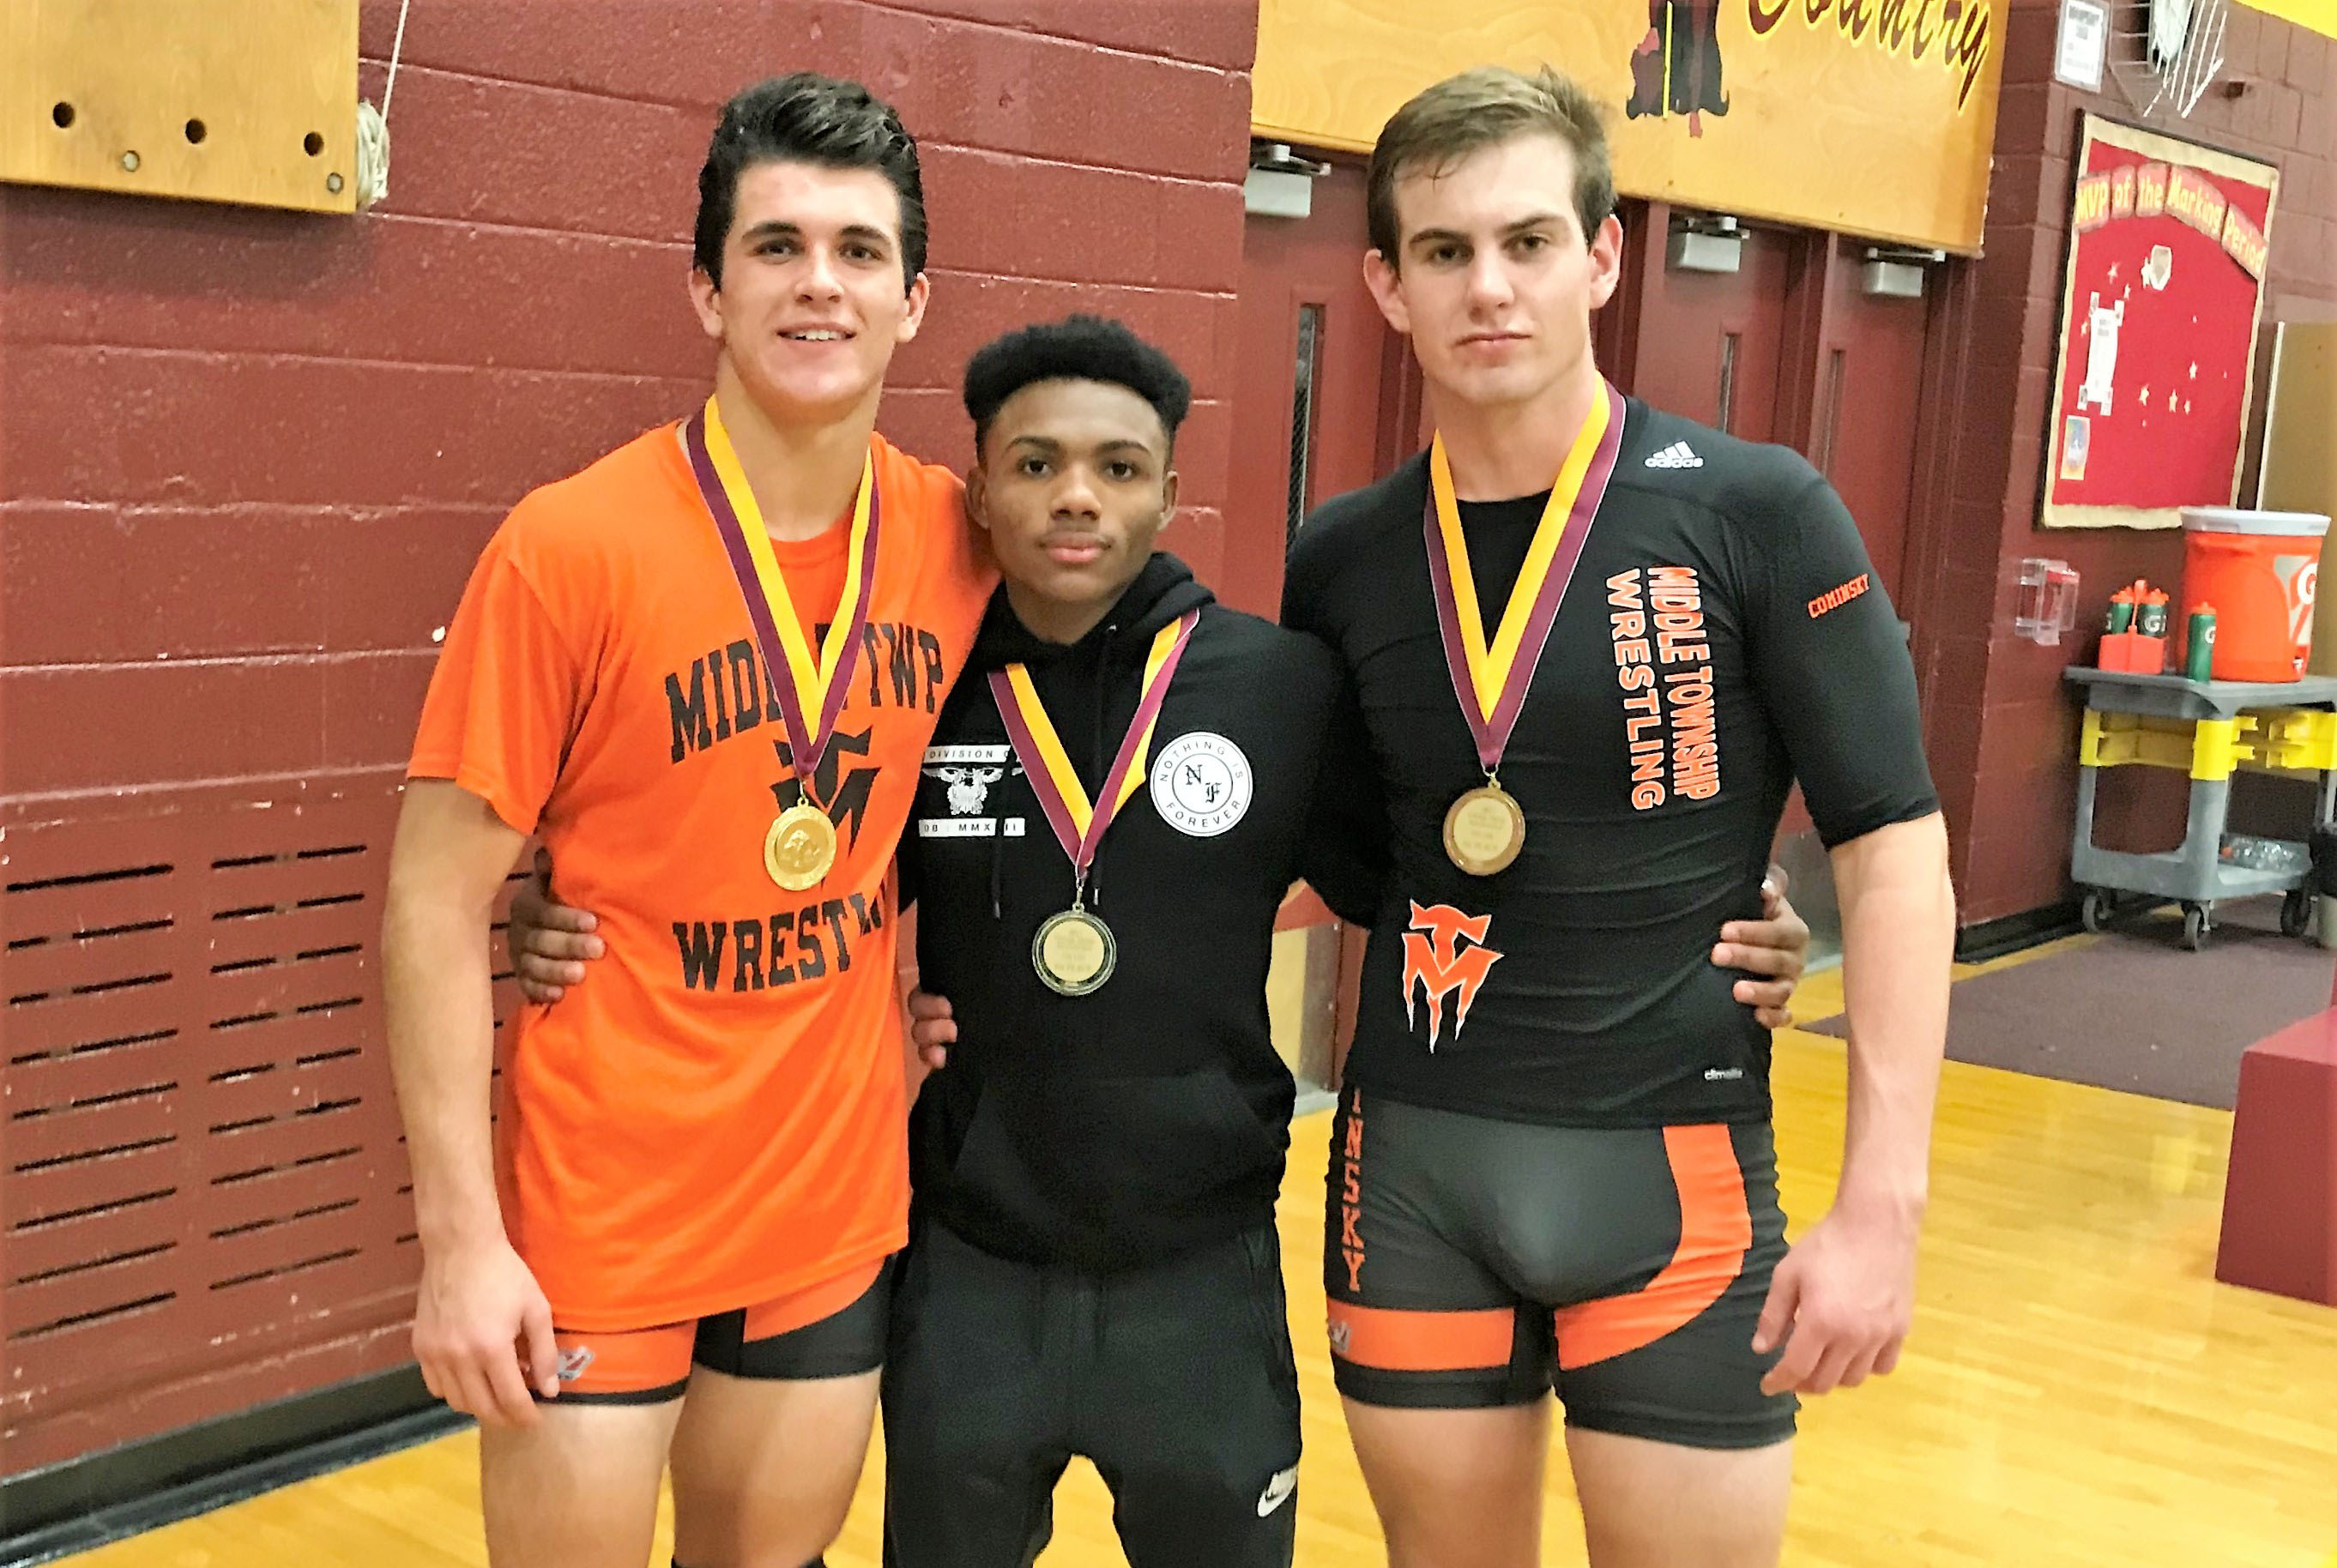 Three from Middle, one from OC win titles at seasonopening wrestling